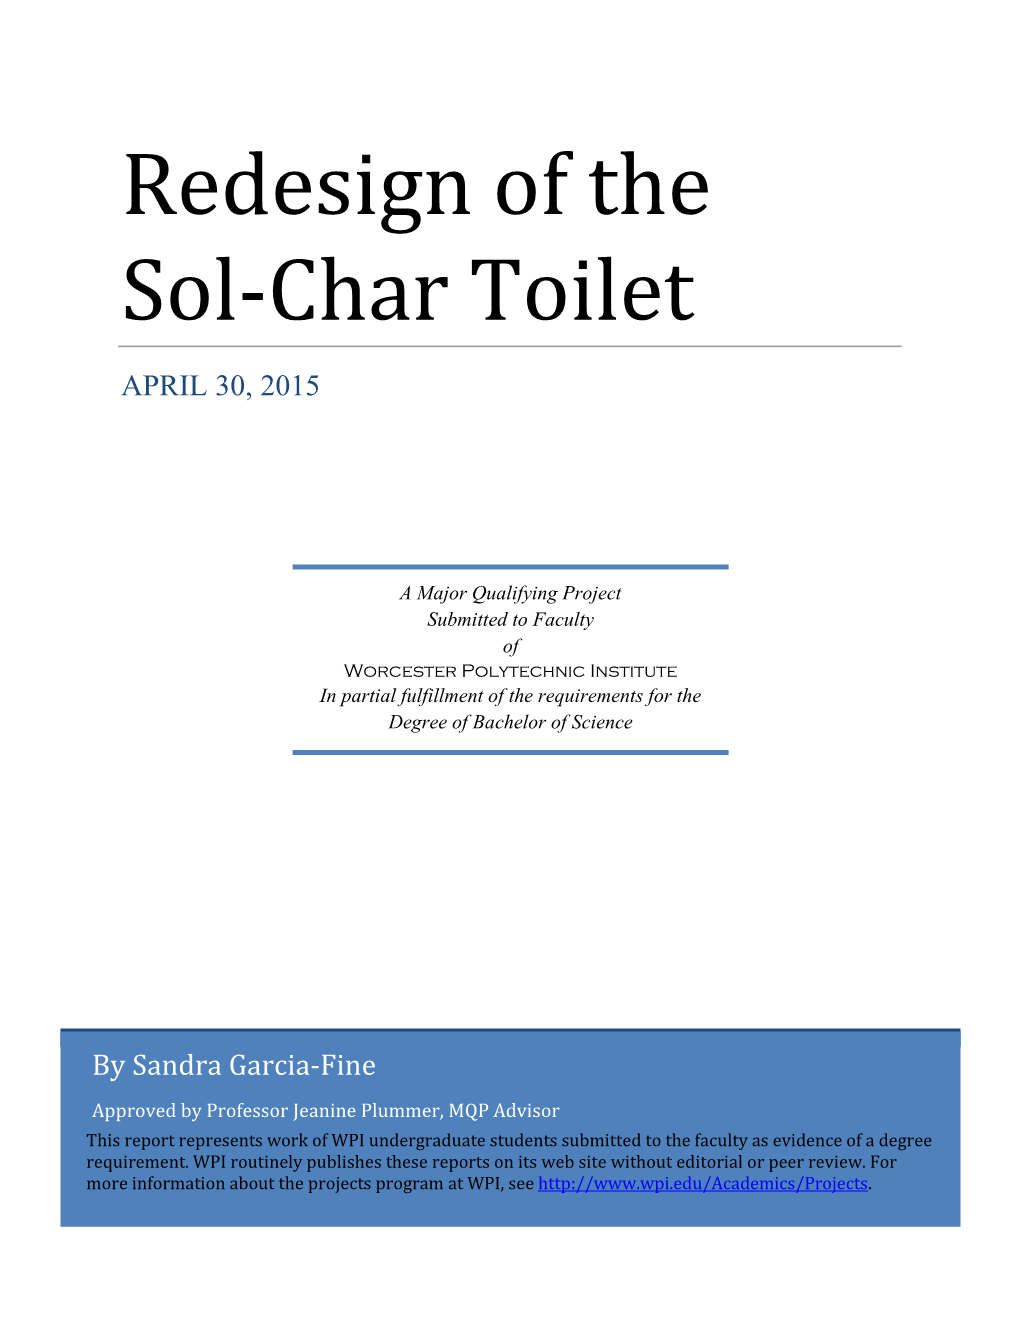 Redesign of the Sol-Char Toilet